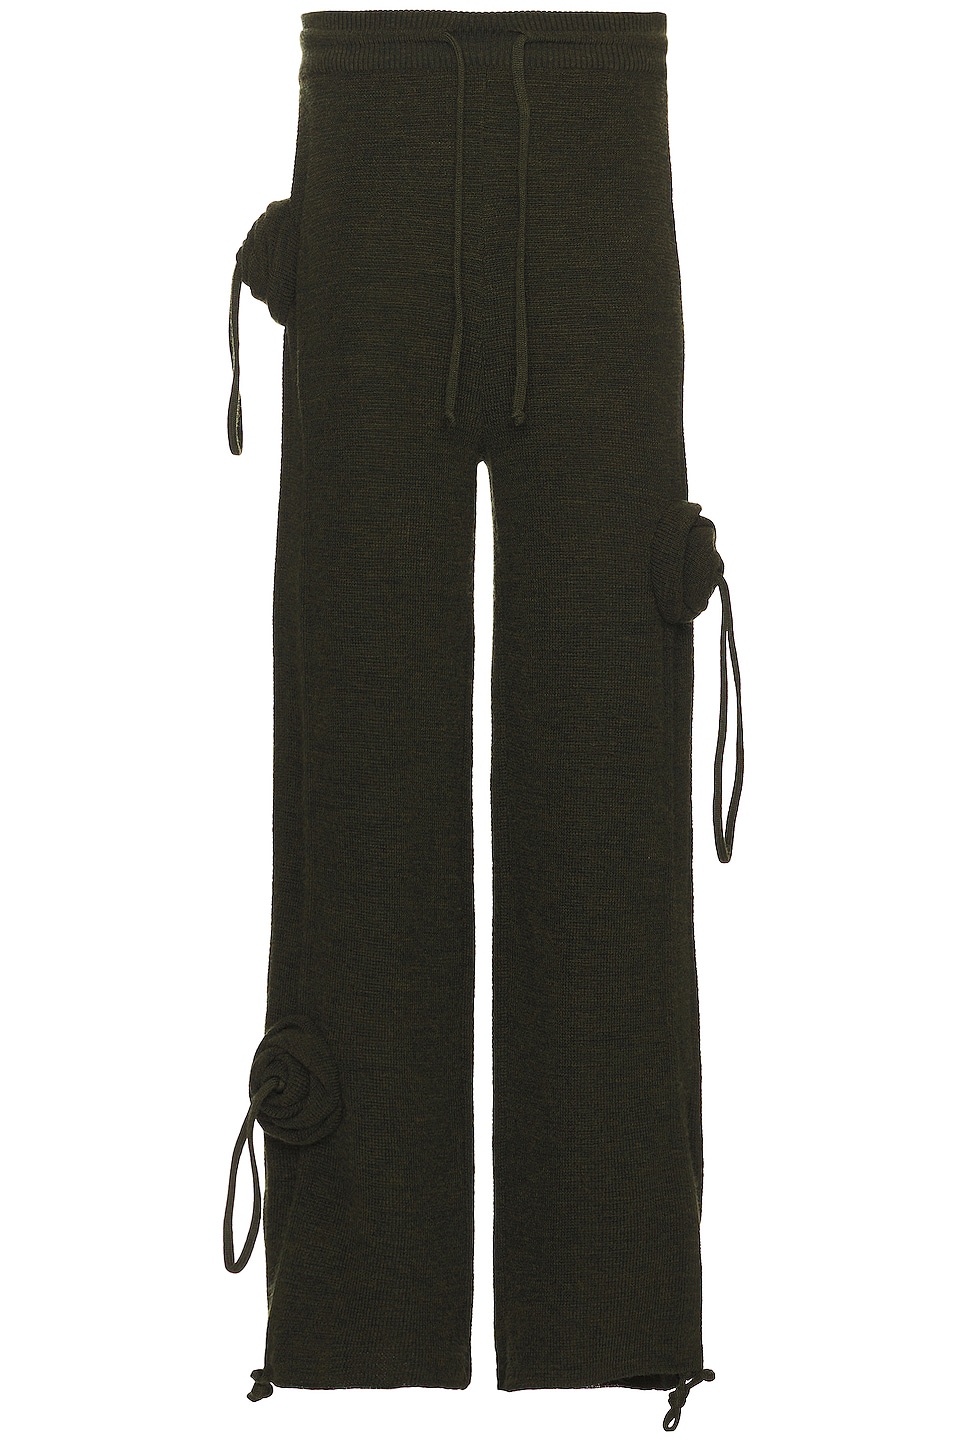 Image 1 of Burberry Military Cargo Pant in Military